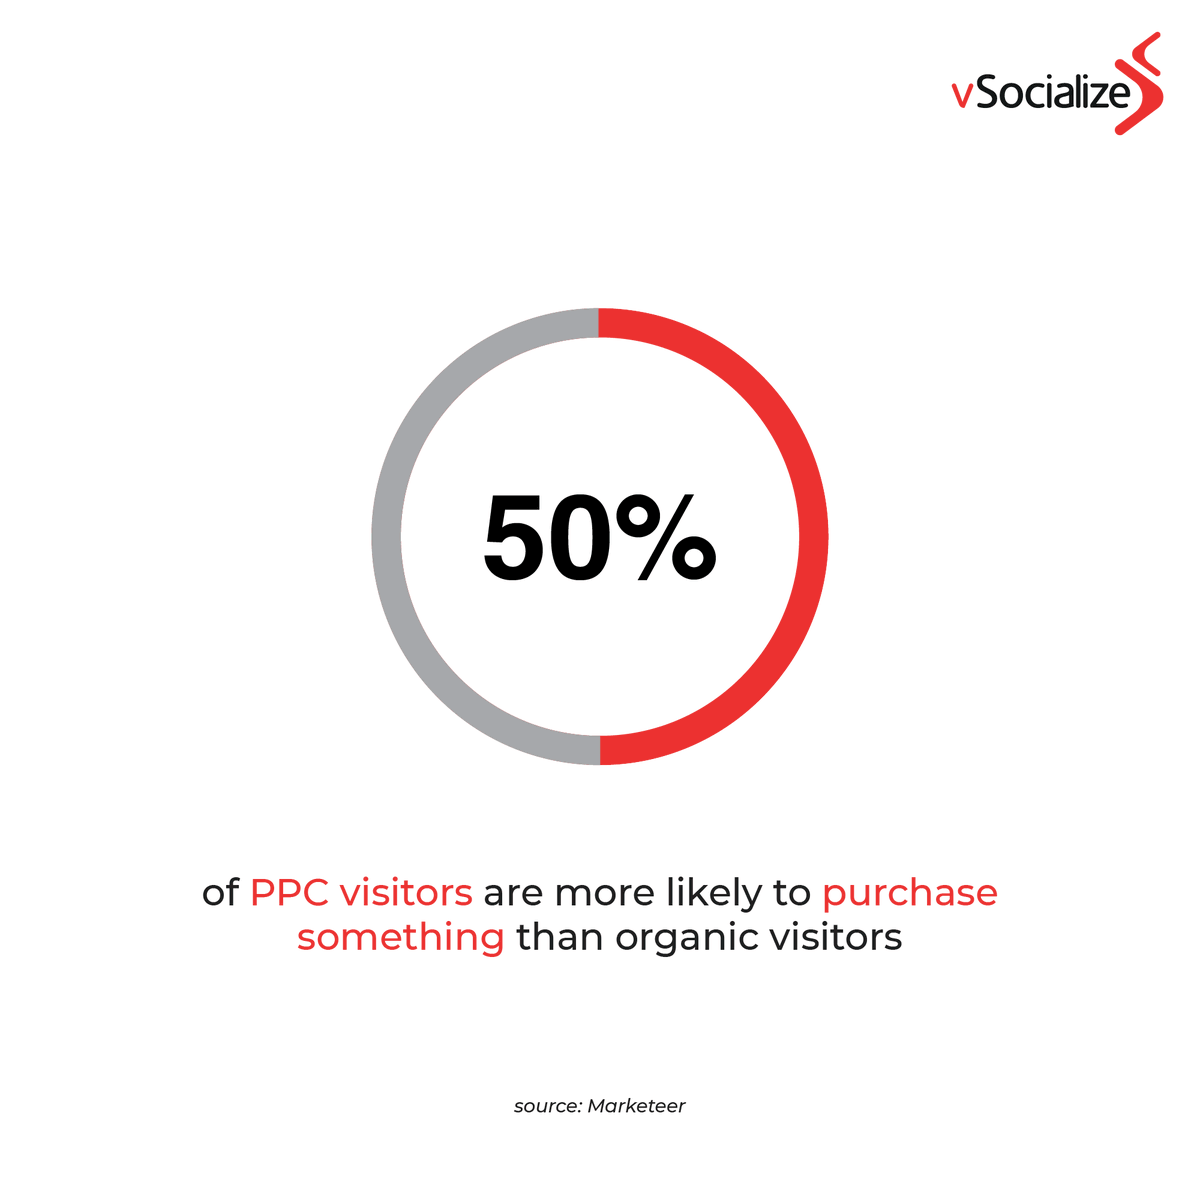 #PPCcampaigns drives more traffic than #SEO campaigns. If your goals are immediate conversions, testing, or product sales, #PPC is the way to go! Talk to our experts and elevate your business with #CreativeBranding, #Marketing & #Technology, reach us at +91 8248915905